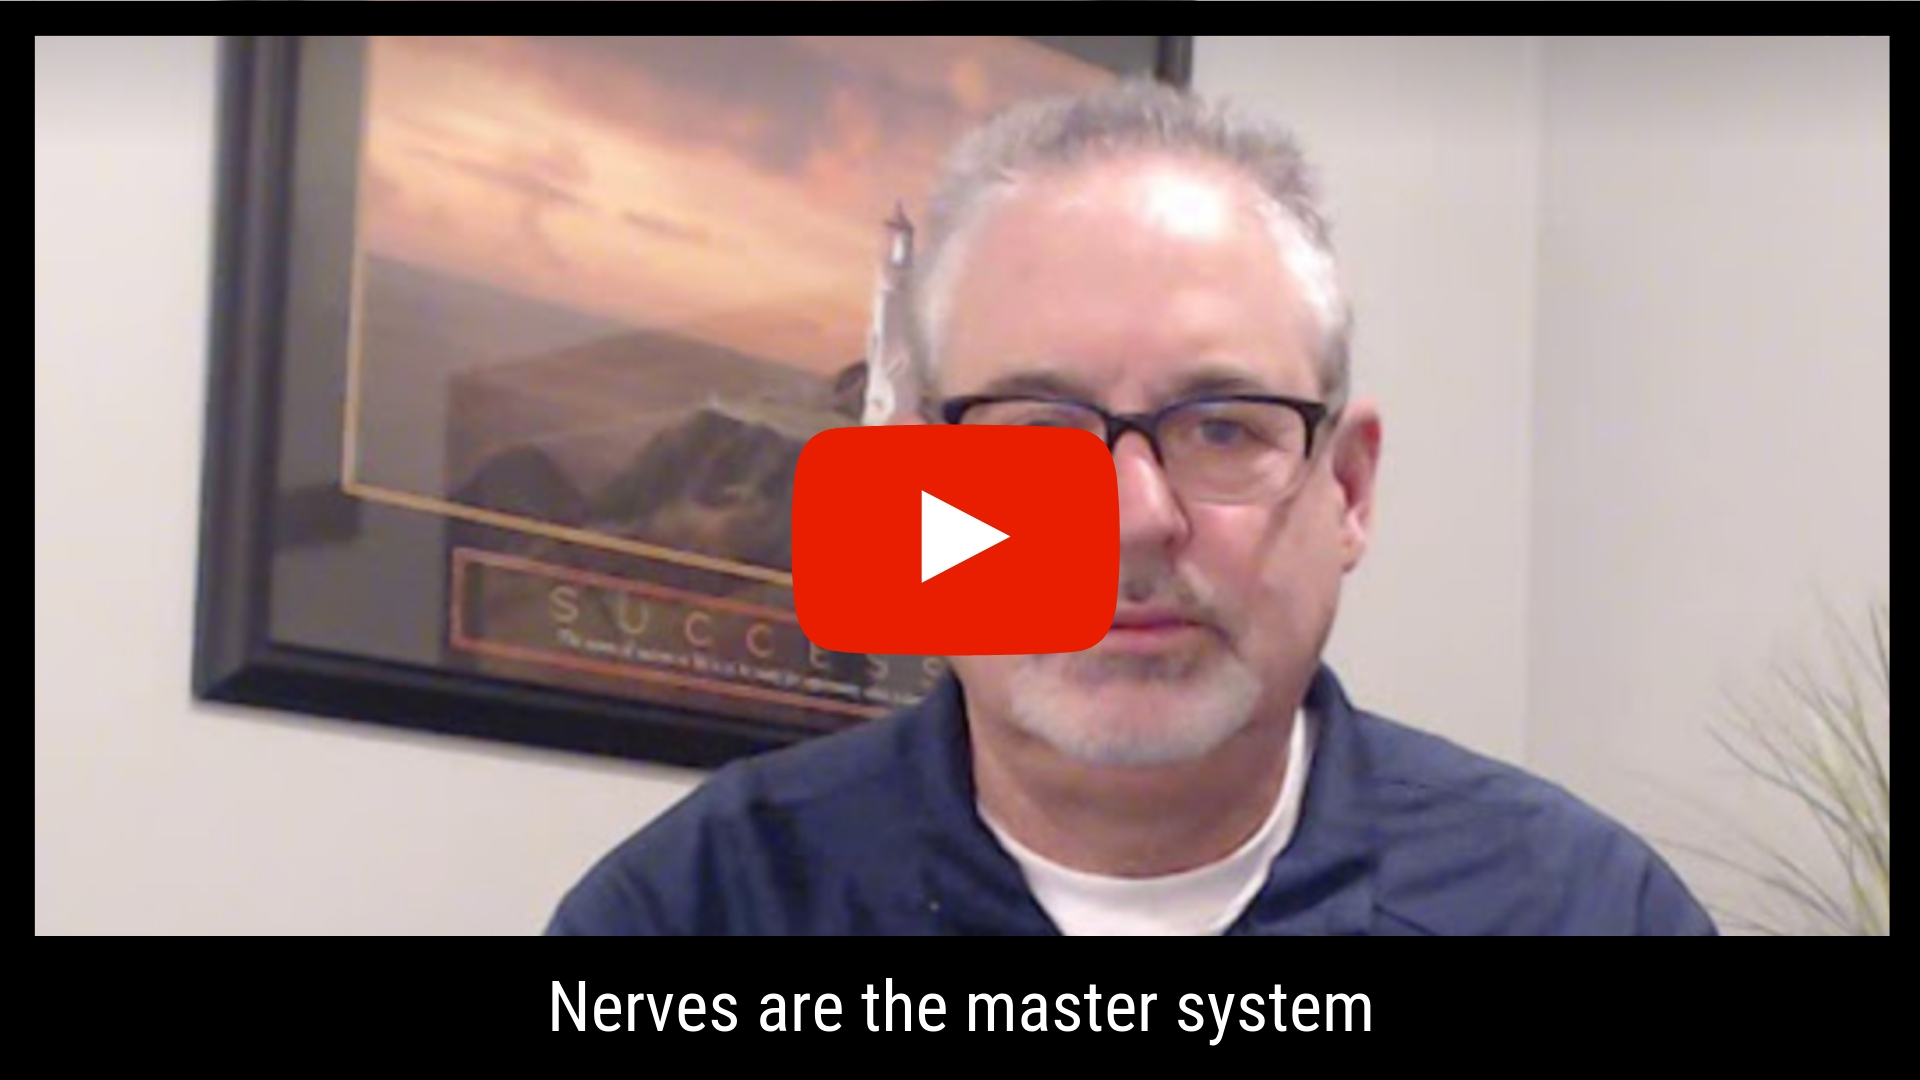 Nerves are the master system.